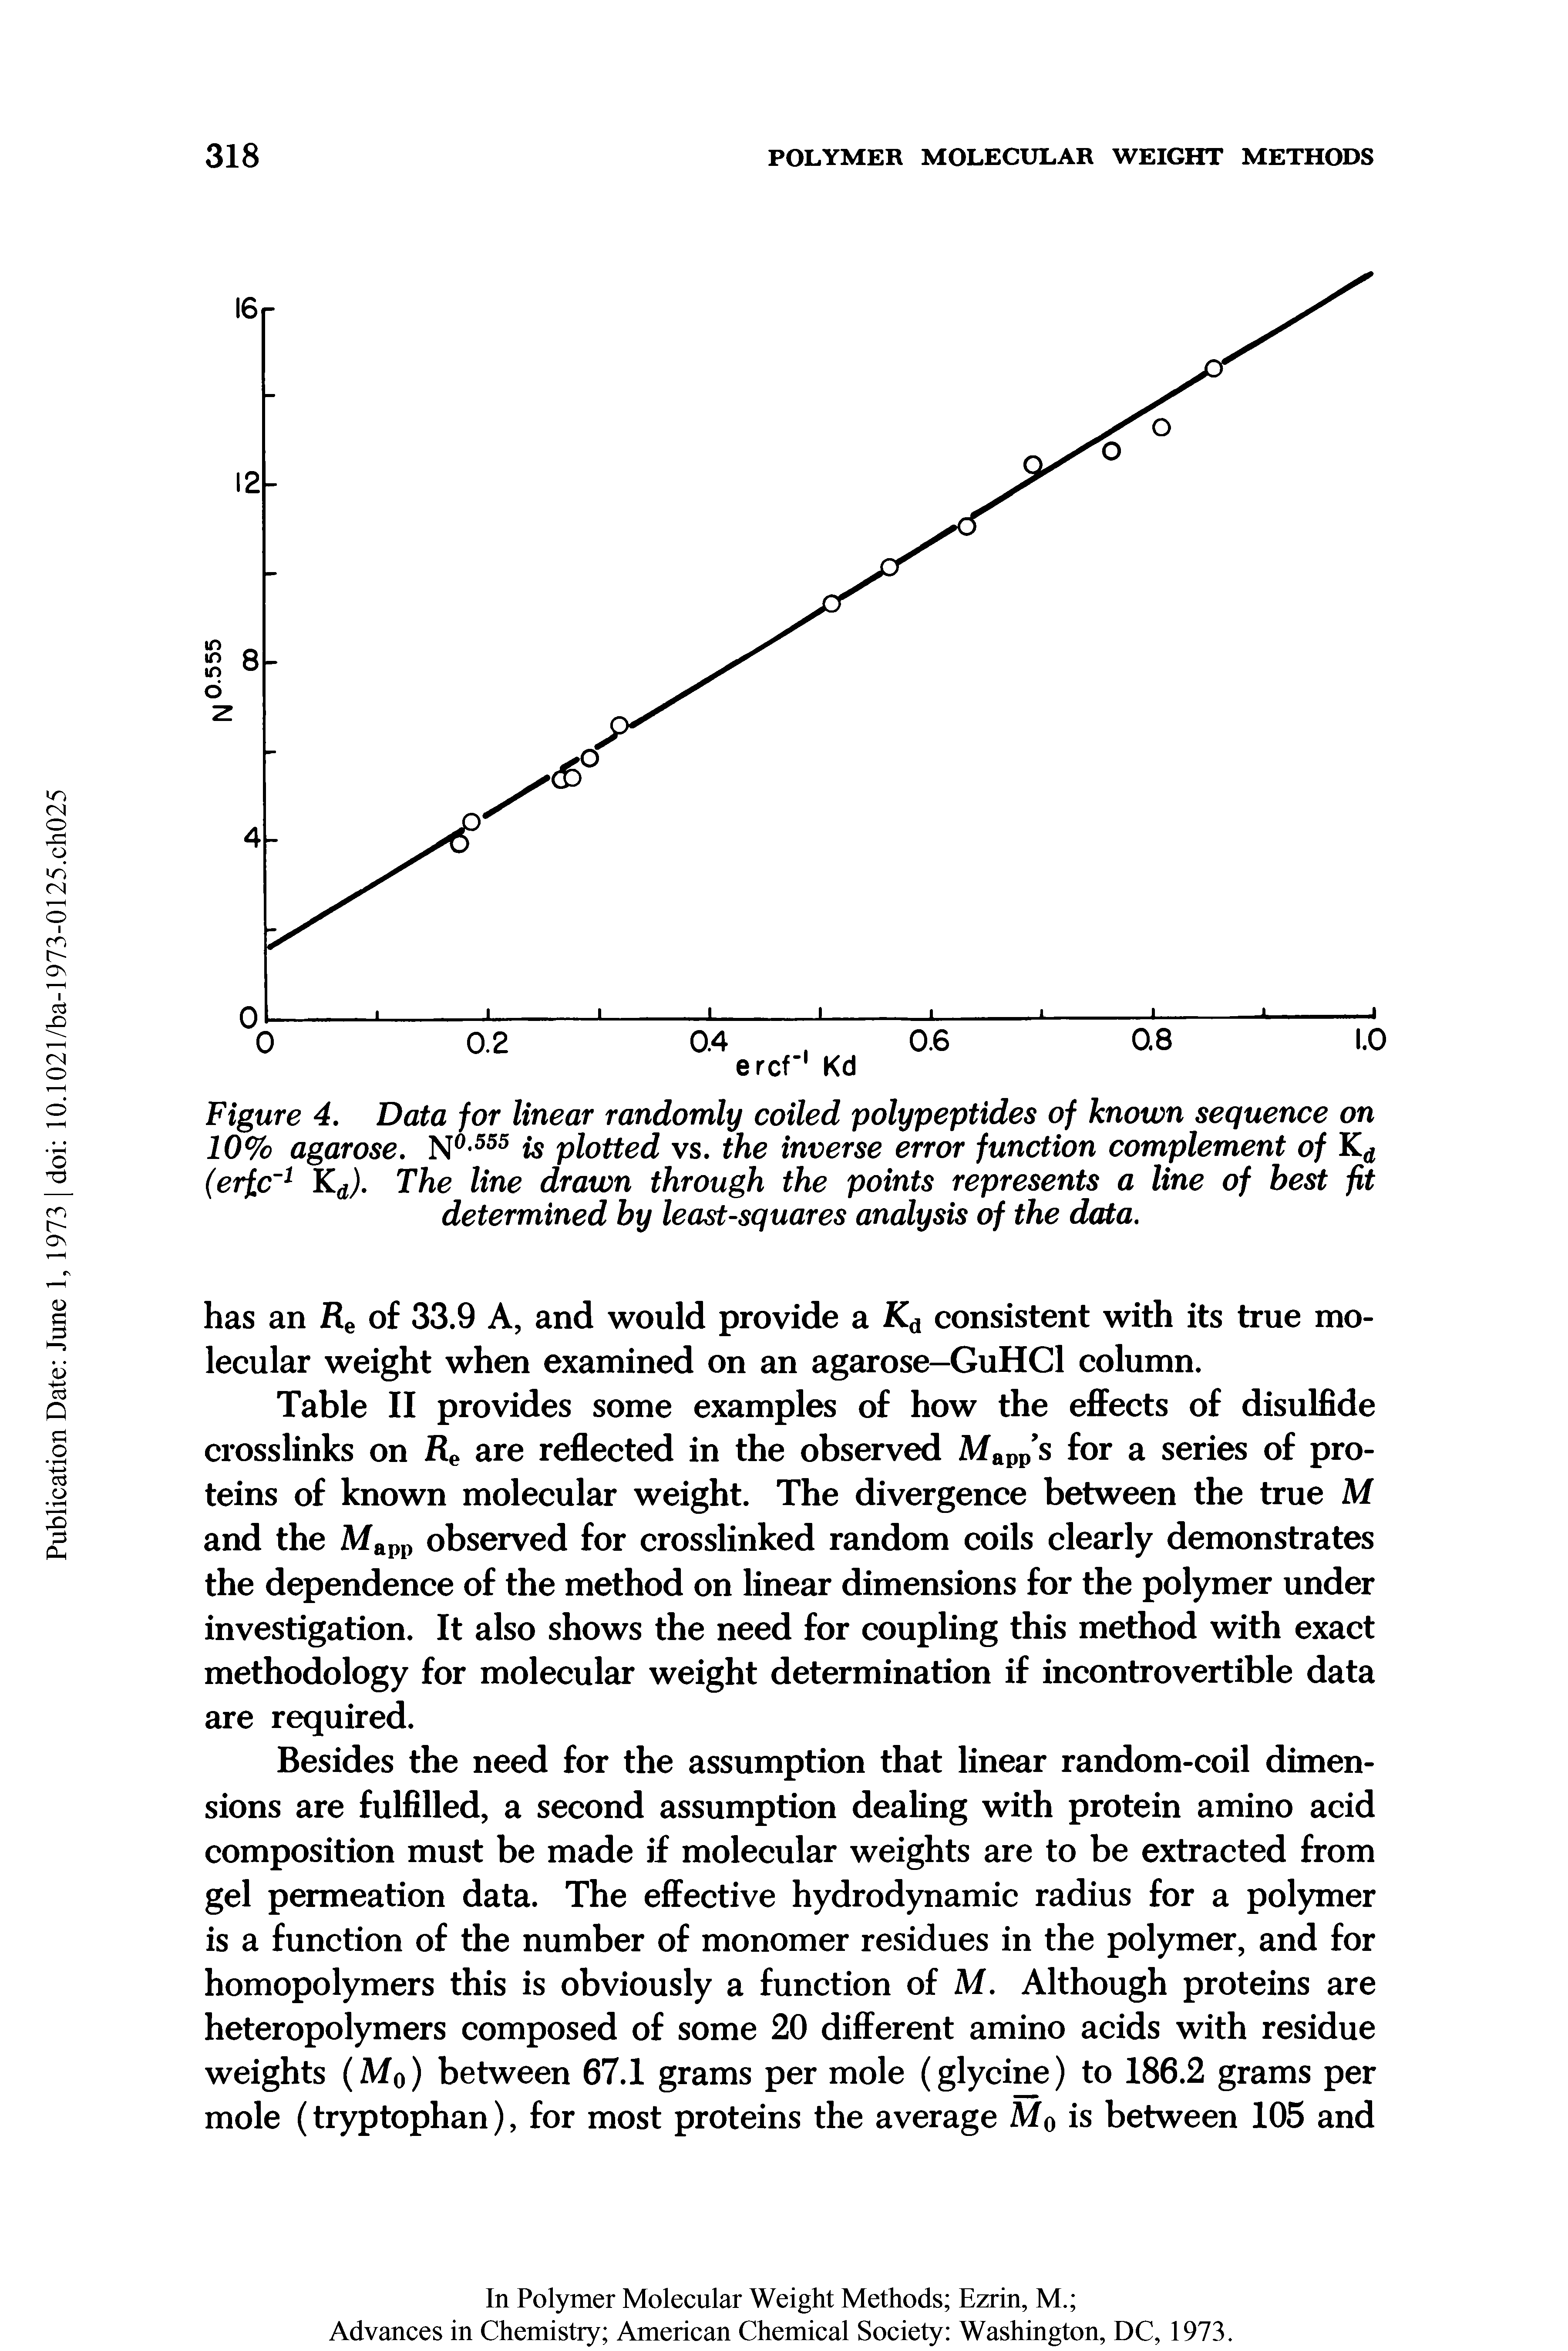 Table II provides some examples of how the effects of disulfide crosslinks on Re are reflected in the observed Mapp s for a series of proteins of known molecular weight. The divergence between the true M and the Mapp observed for crosslinked random coils clearly demonstrates the dependence of the method on linear dimensions for the polymer under investigation. It also shows the need for coupling this method with exact methodology for molecular weight determination if incontrovertible data are required.